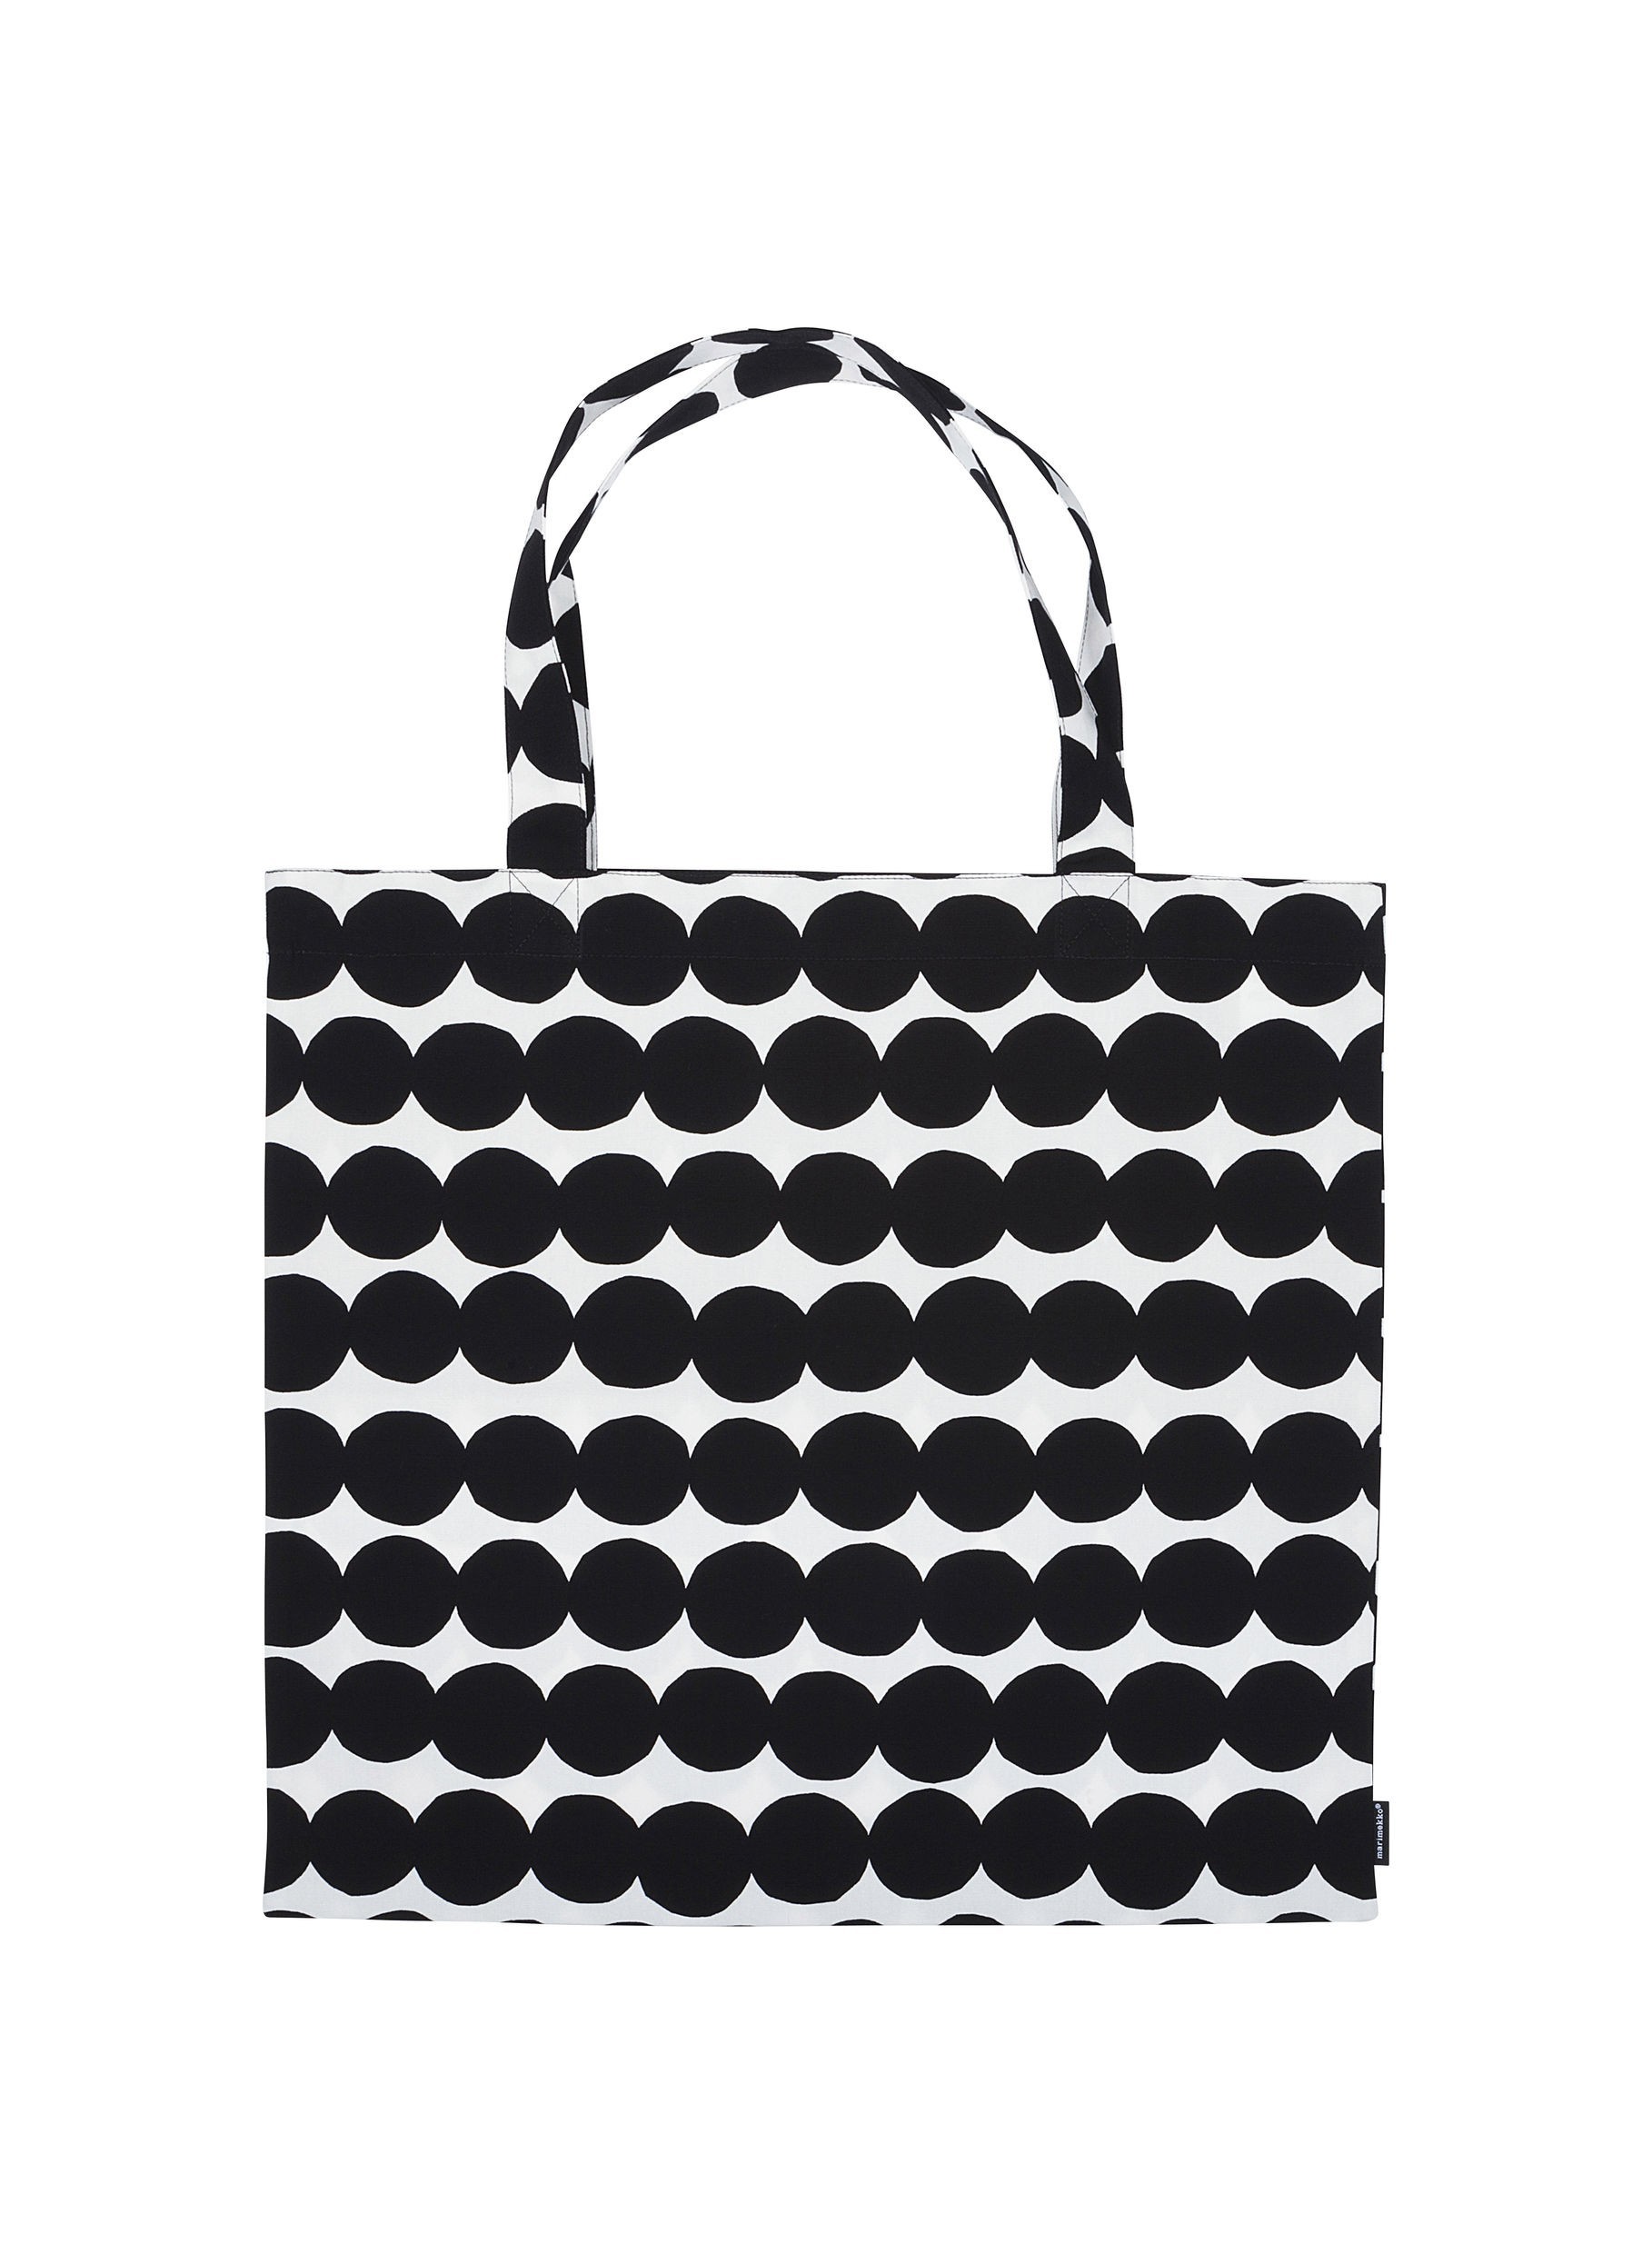 Tote Bags, Shopping Bags, Travel Bags – Shop Online